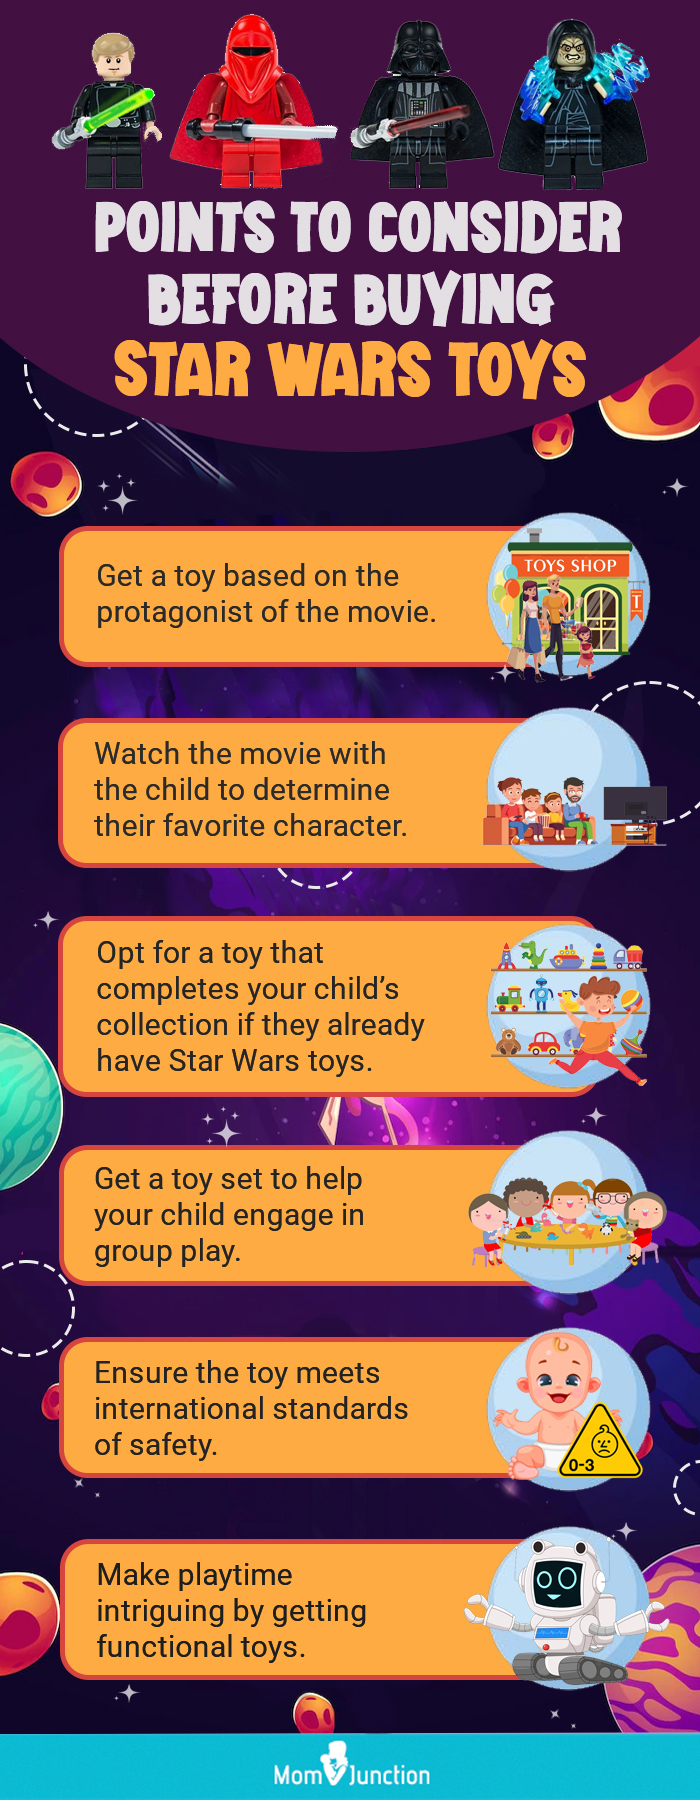 Points To Consider Before Buying Star Wars Toys